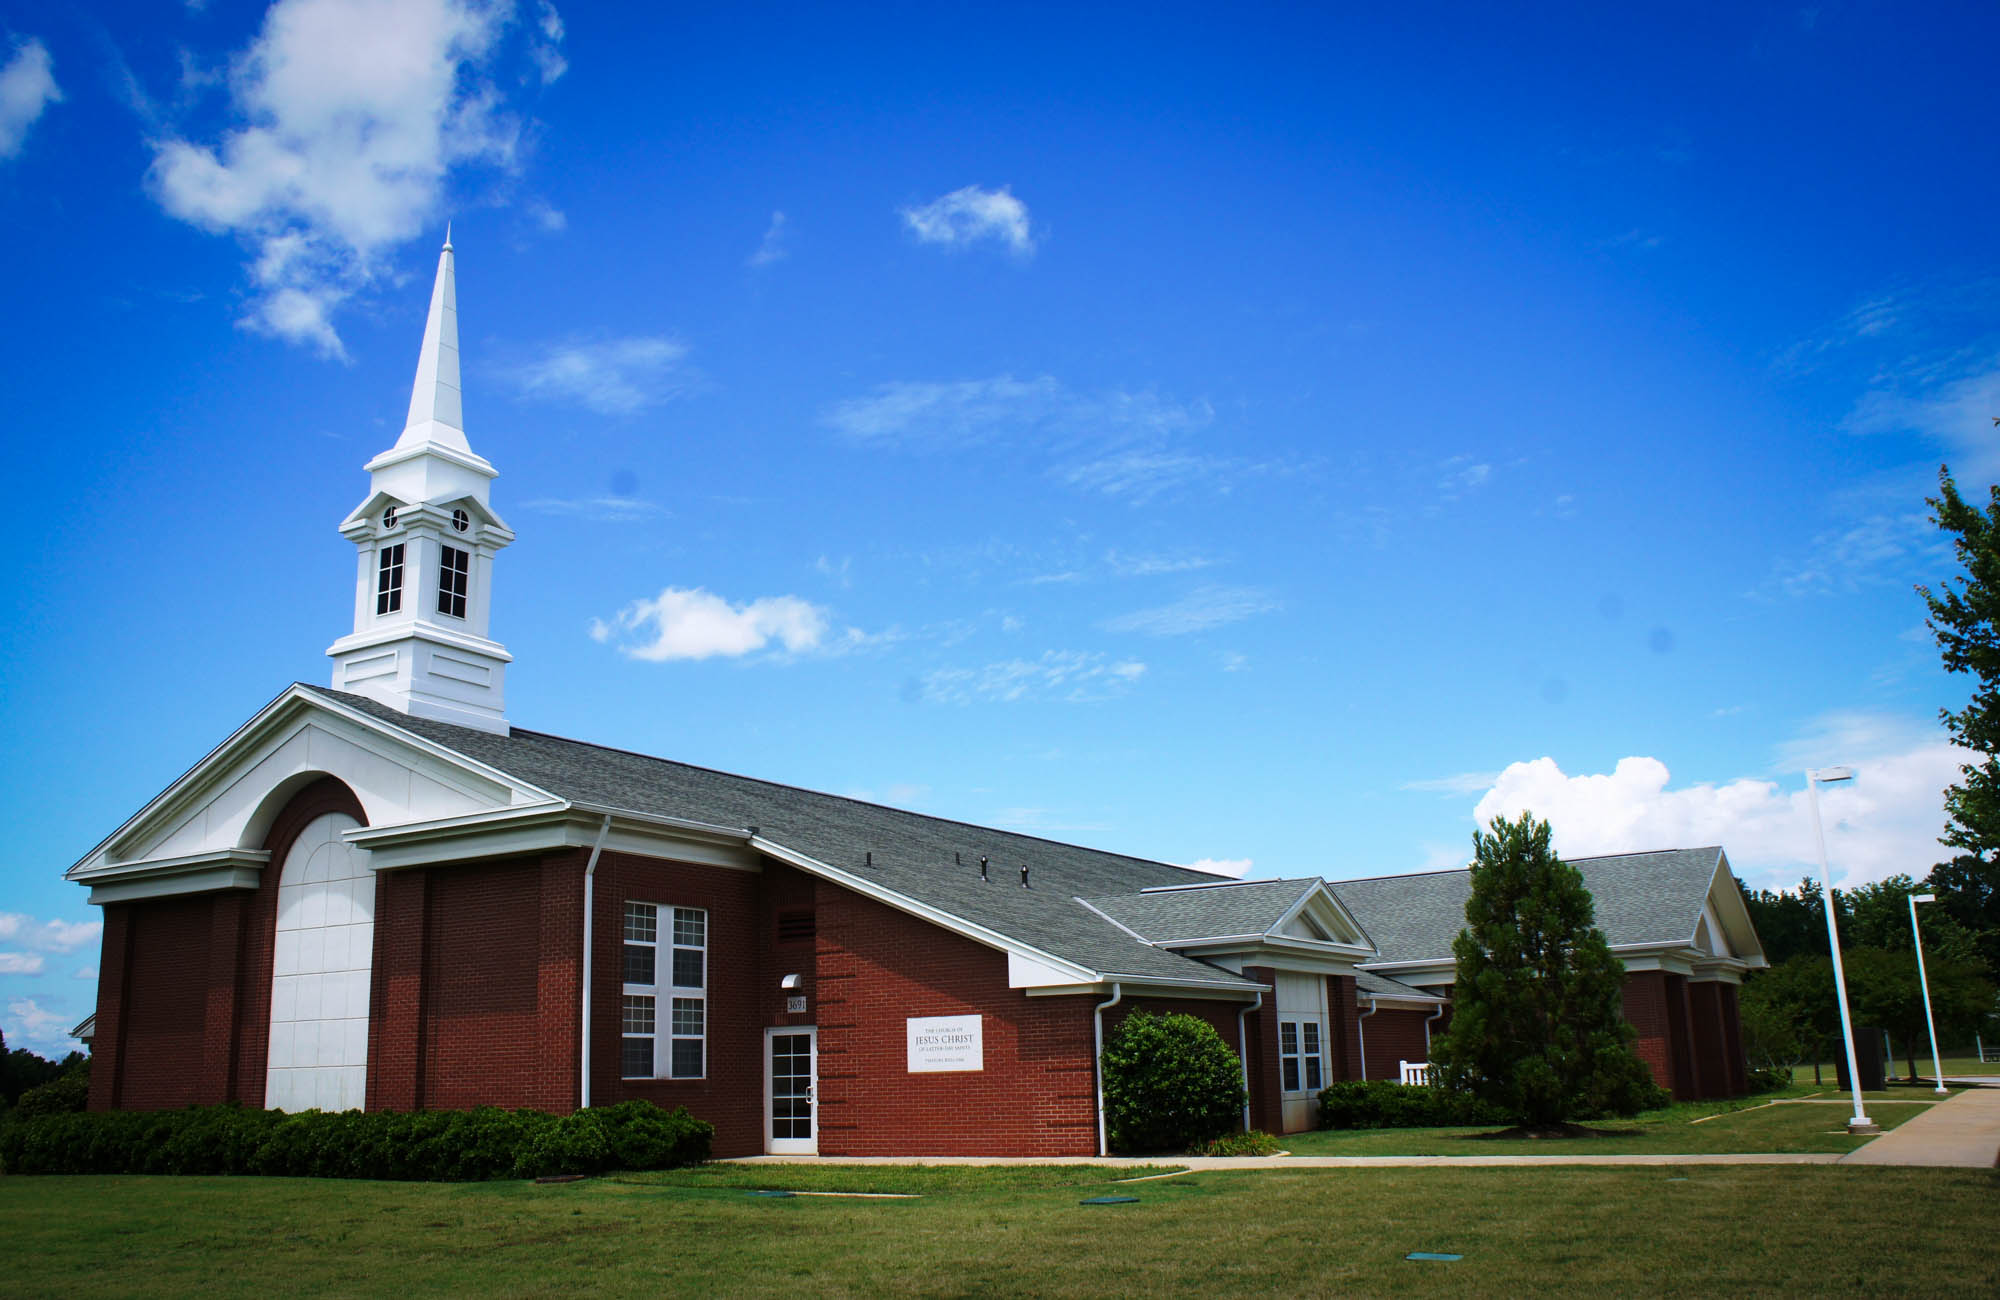 Boiling Springs LDS Church